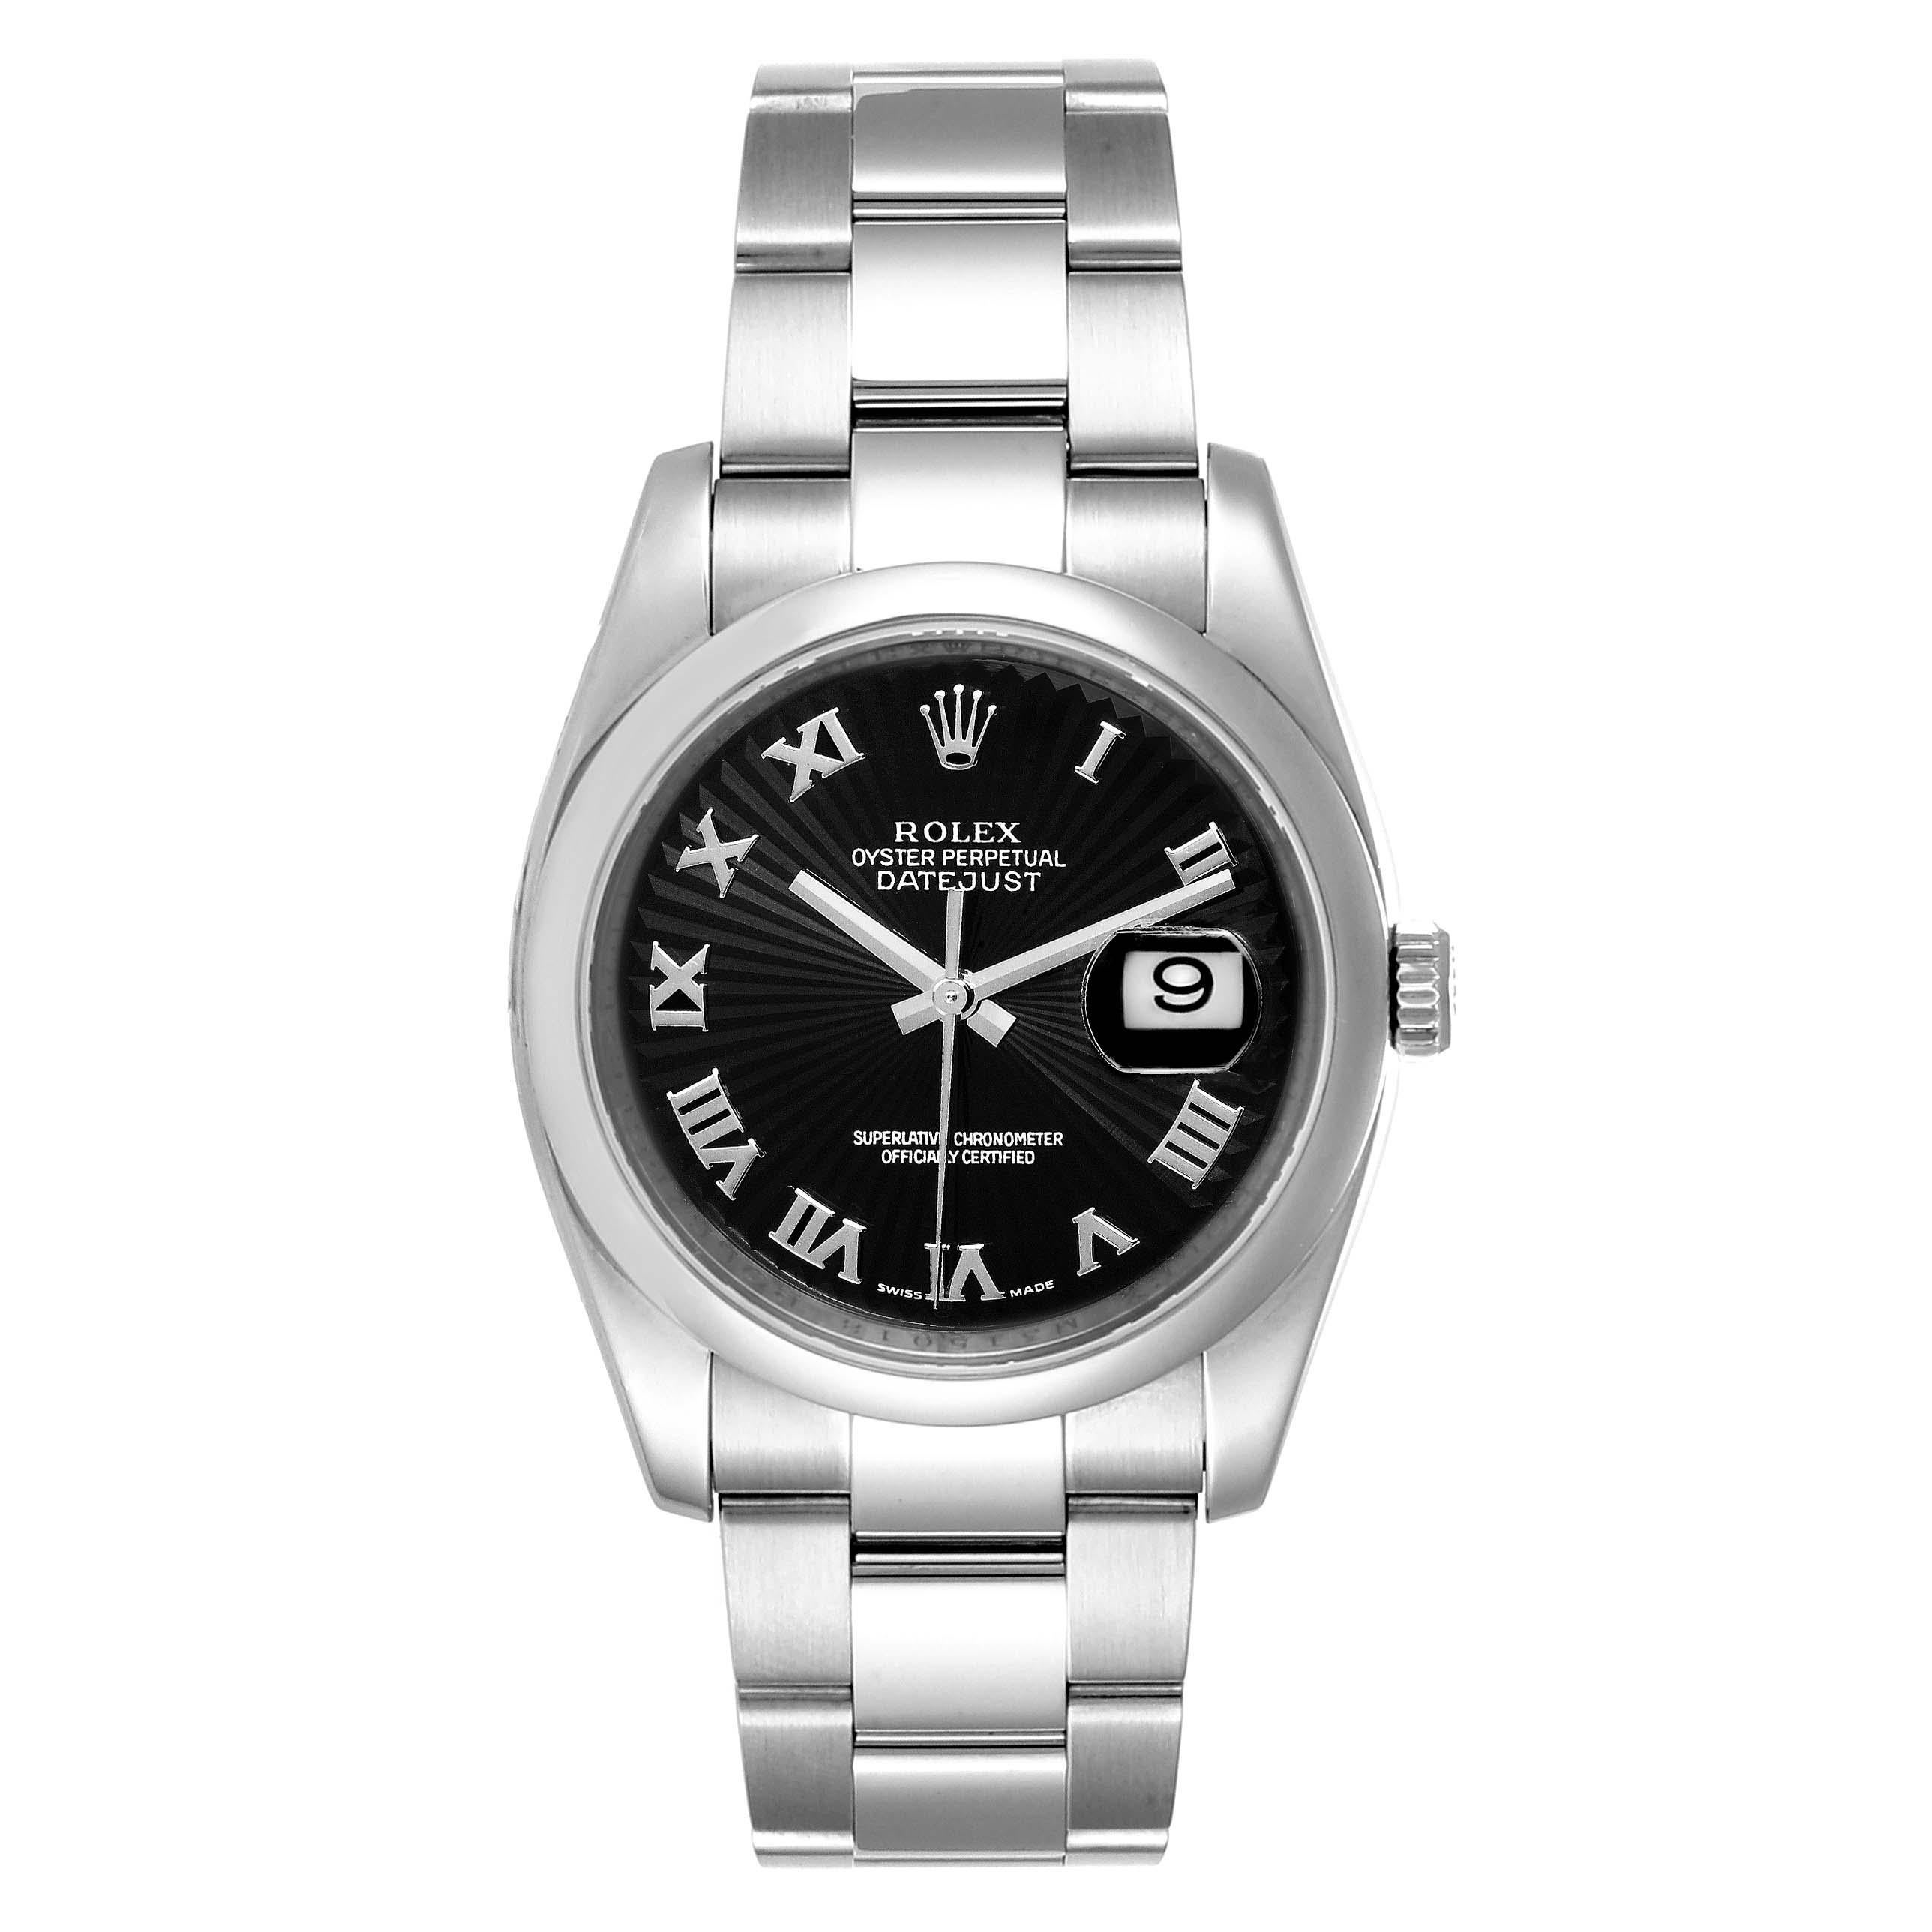 Rolex Datejust Black Sunbeam Dial Oyster Bracelet Steel Mens Watch 116200. Officially certified chronometer self-winding movement with quickset date. Stainless steel case 36.0 mm in diameter. Rolex logo on a crown. Stainless steel smooth domed